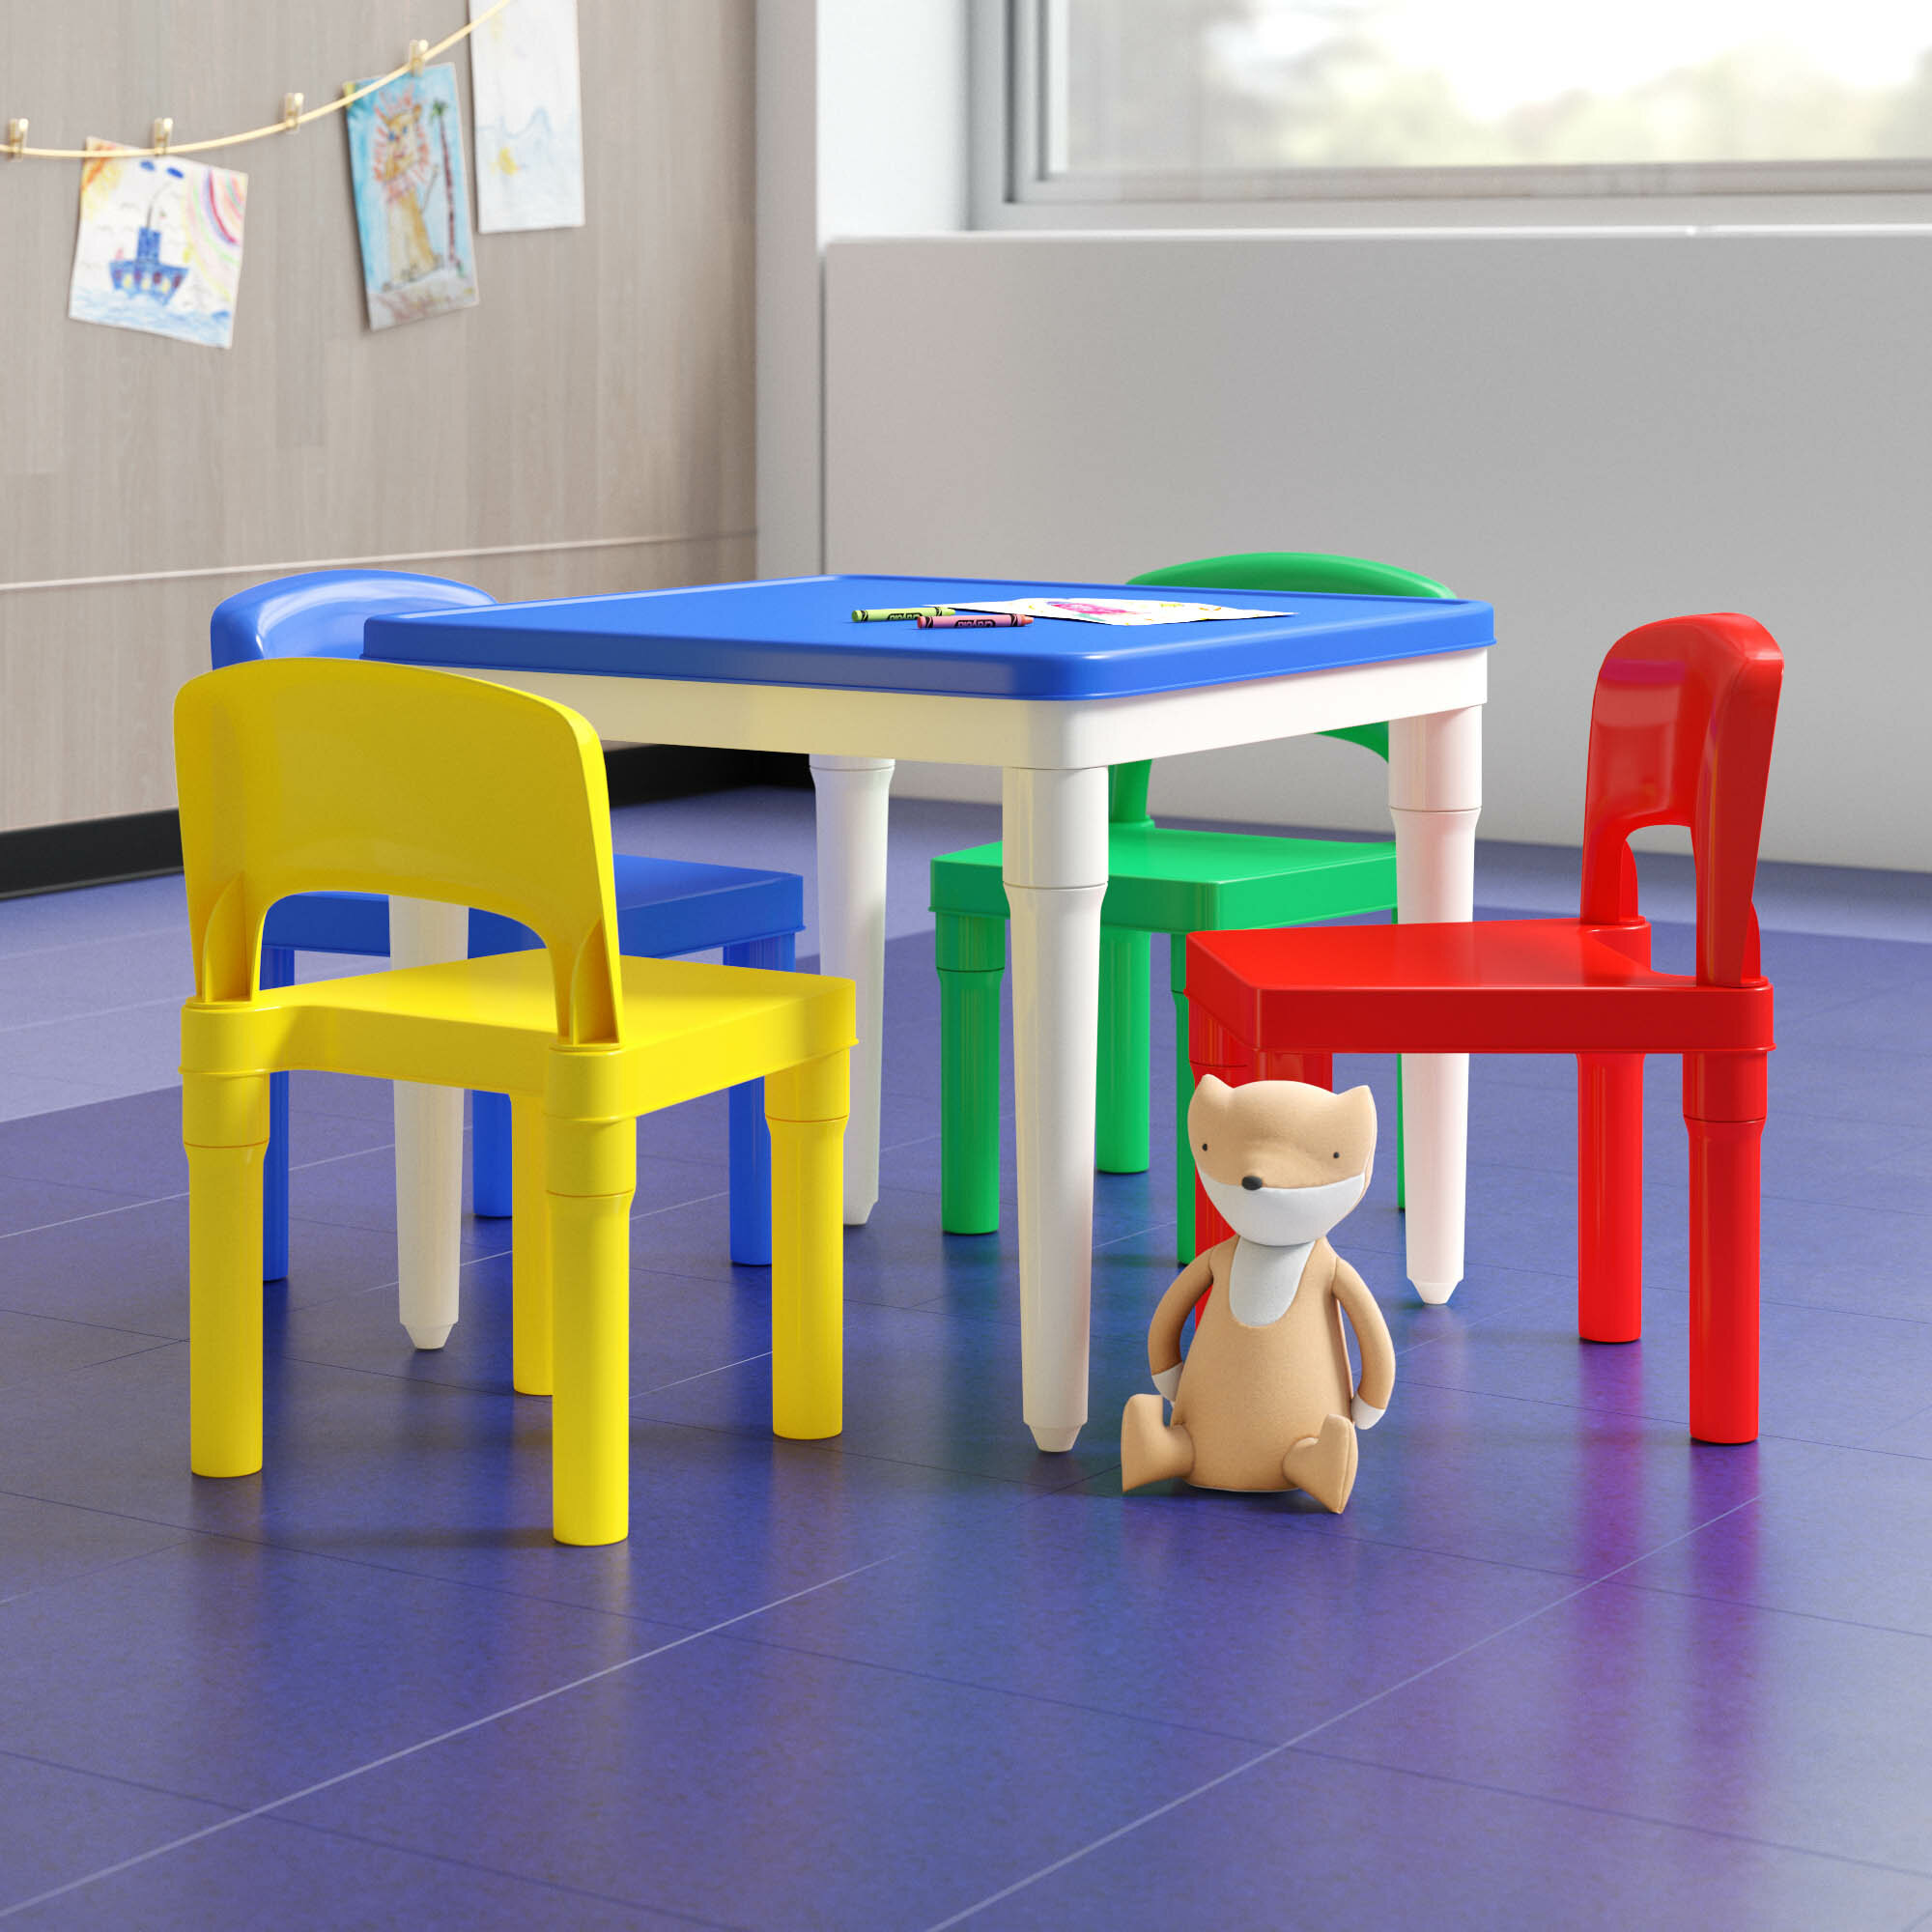 lego activity table and chair set